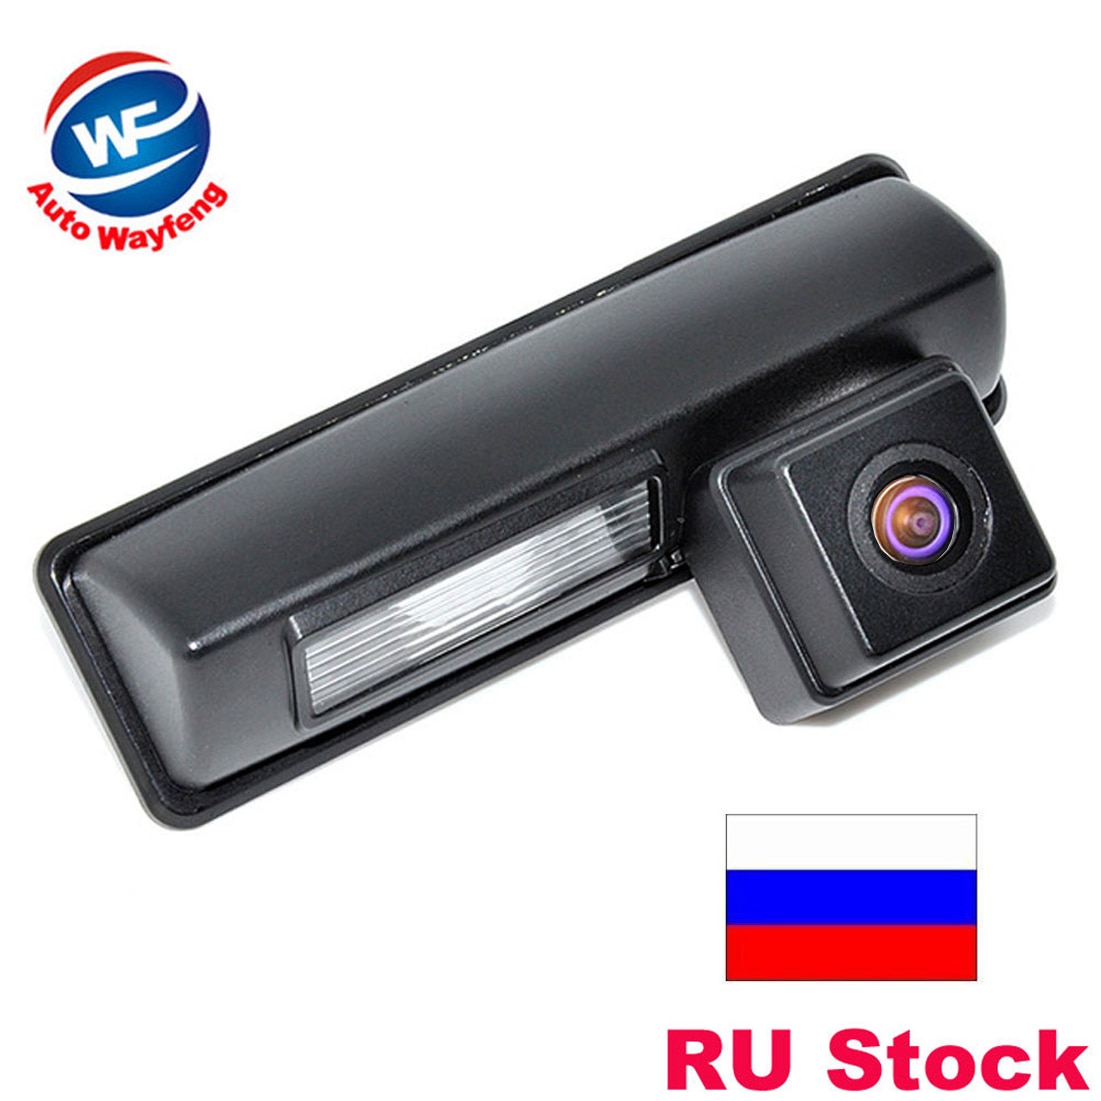 Kleur Ccd/Ccd Camera Fit Voor Toyota 2007 En Camry Auto Achteruitrijcamera Reverse Backup Camera Parking aid